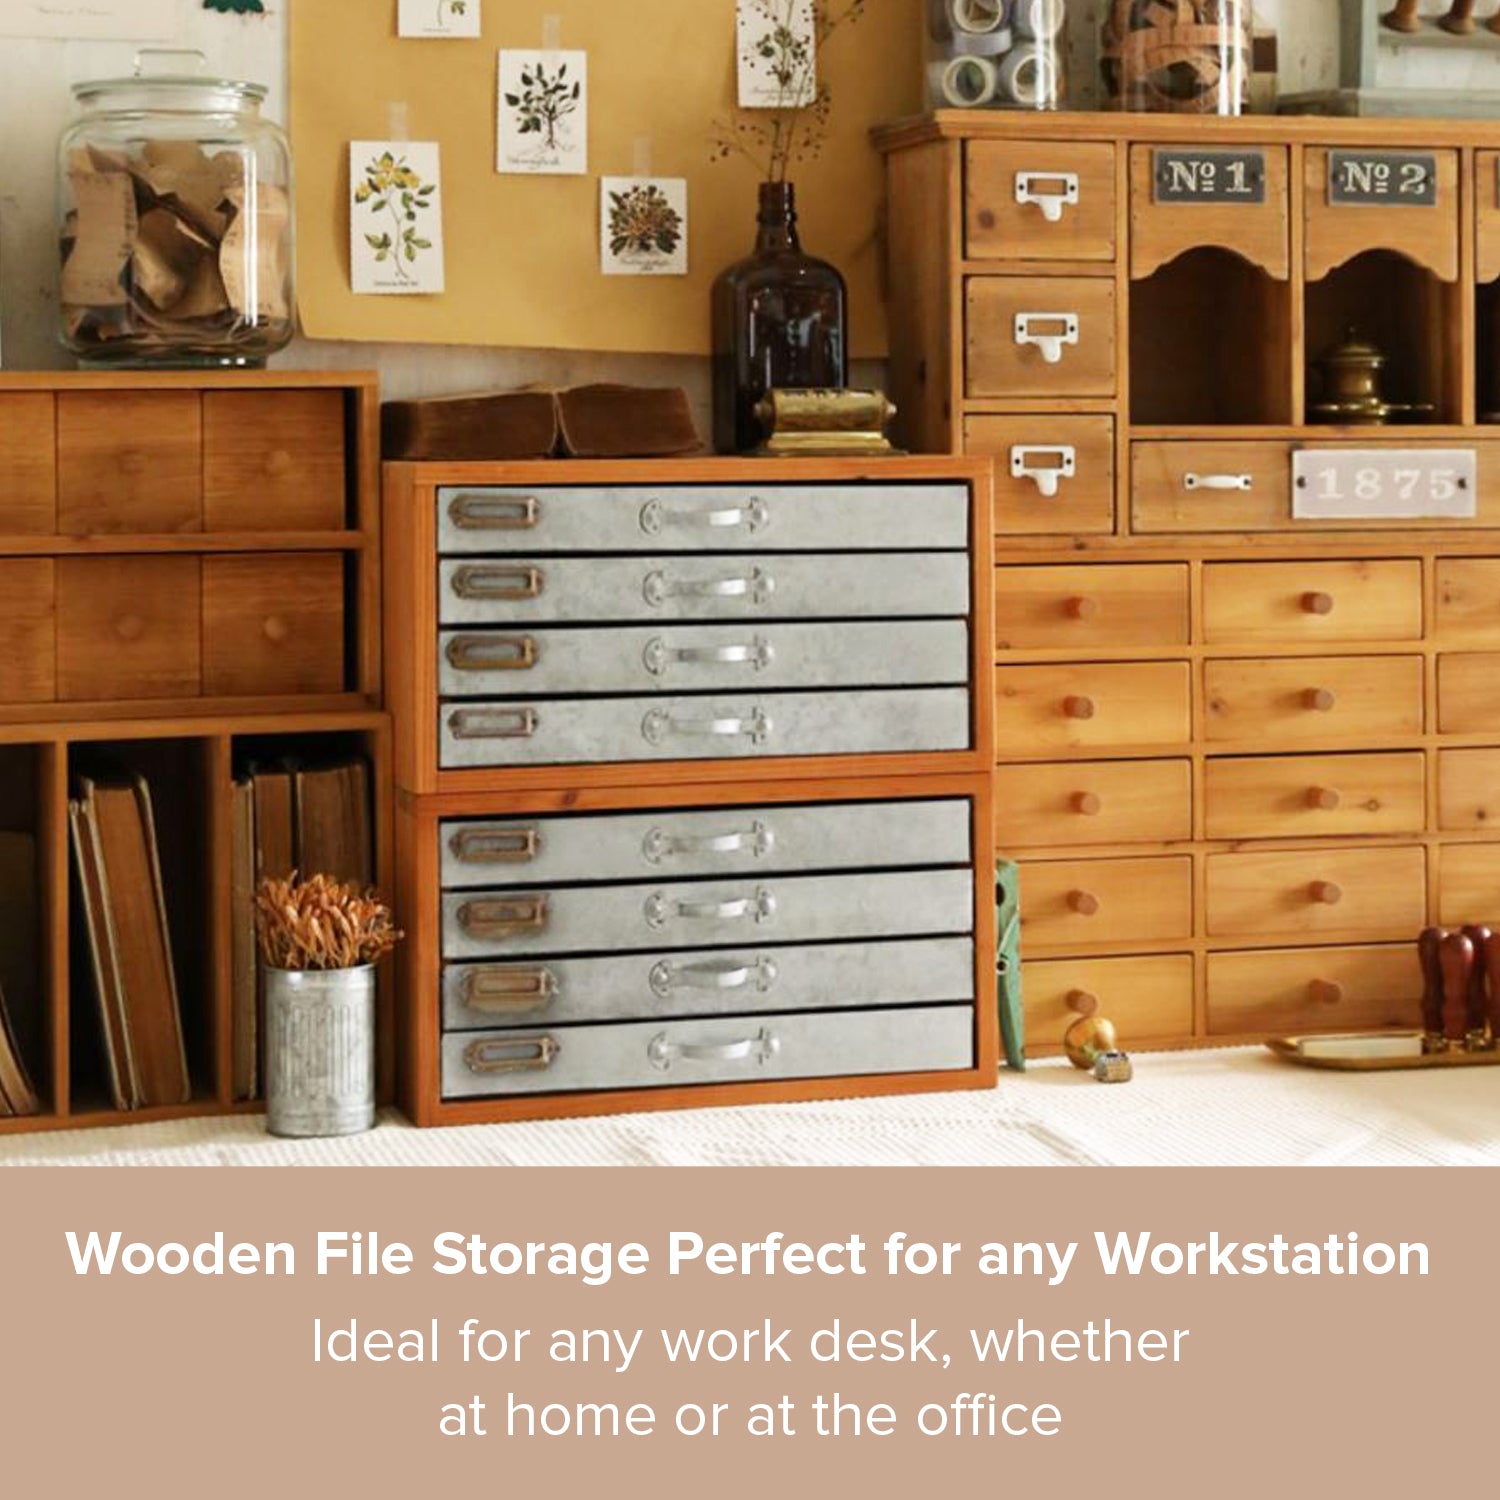 Load image into Gallery viewer, Wooden File Organizer with 4 Metal Drawers | Industrial Steampunk Decor Folder File Organizer